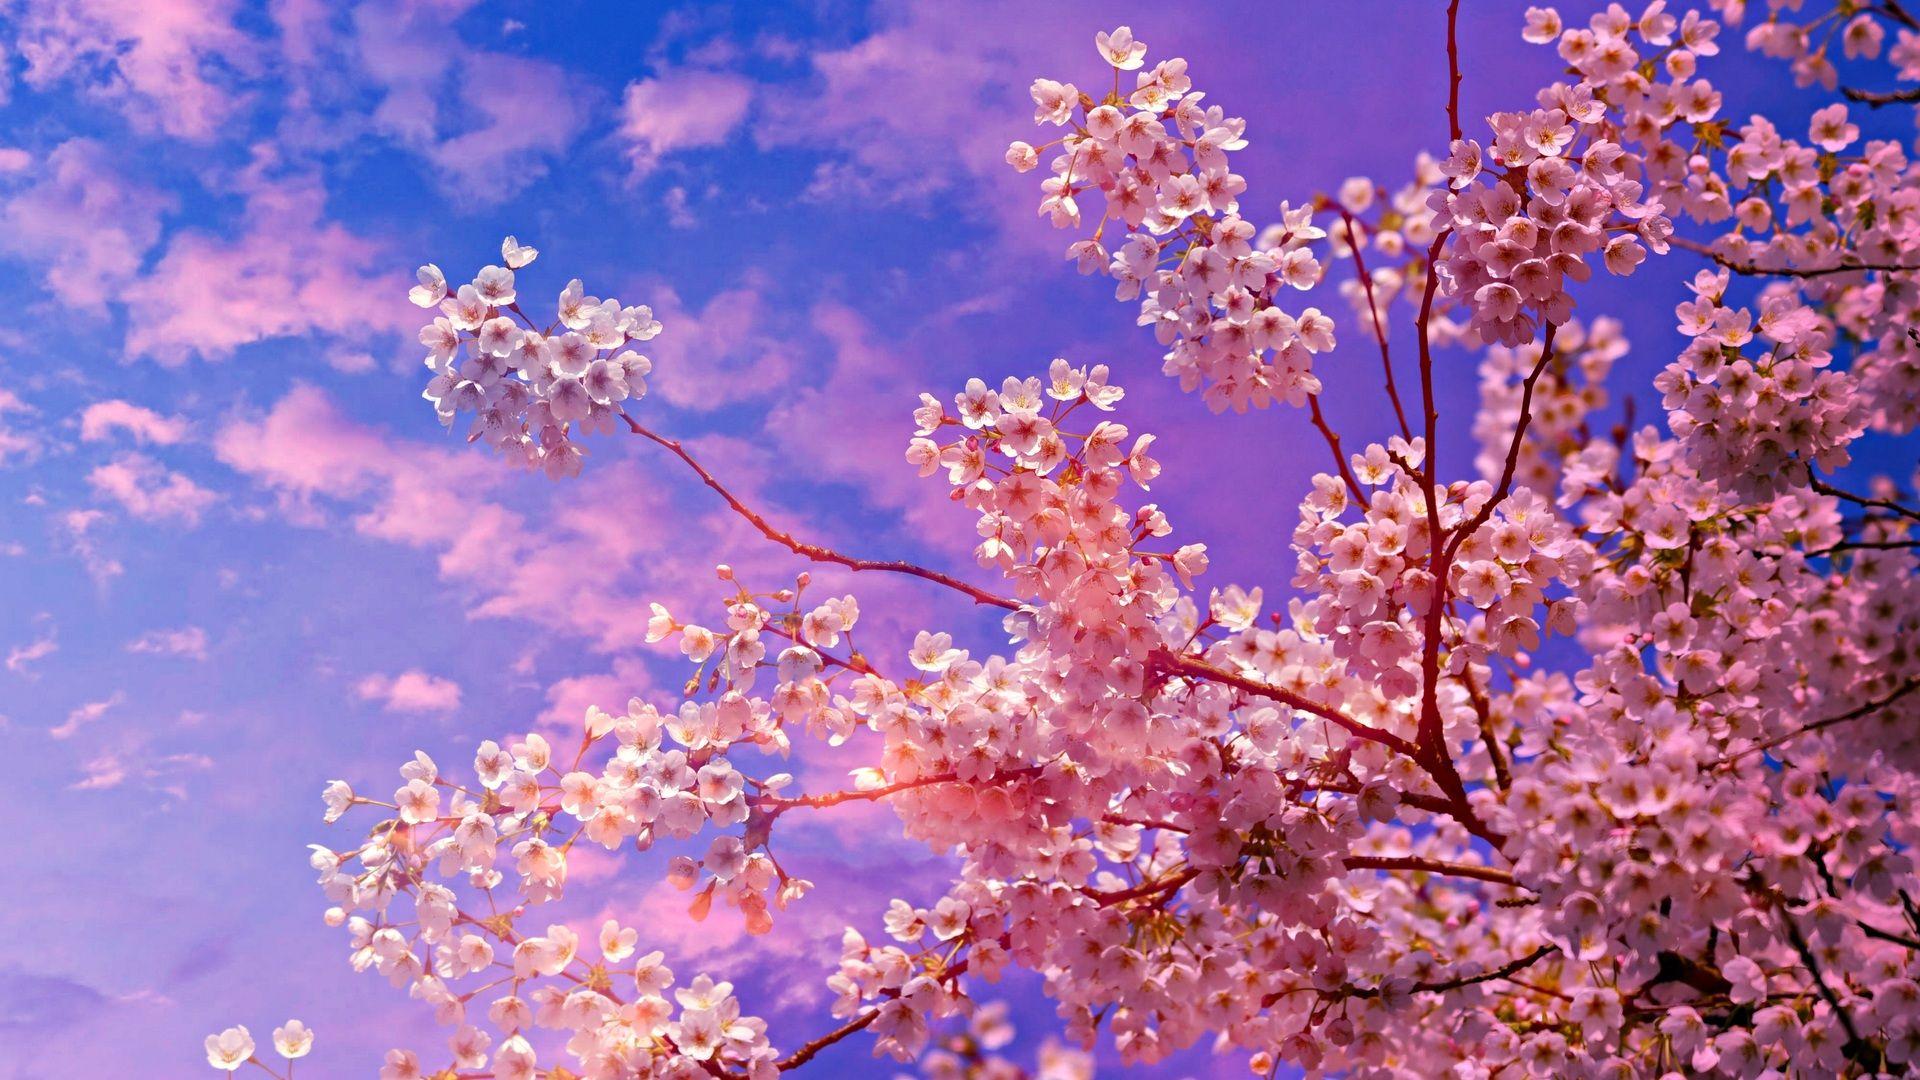 Cherry Blossom Laptop Wallpapers - Top Free Cherry Blossom Laptop